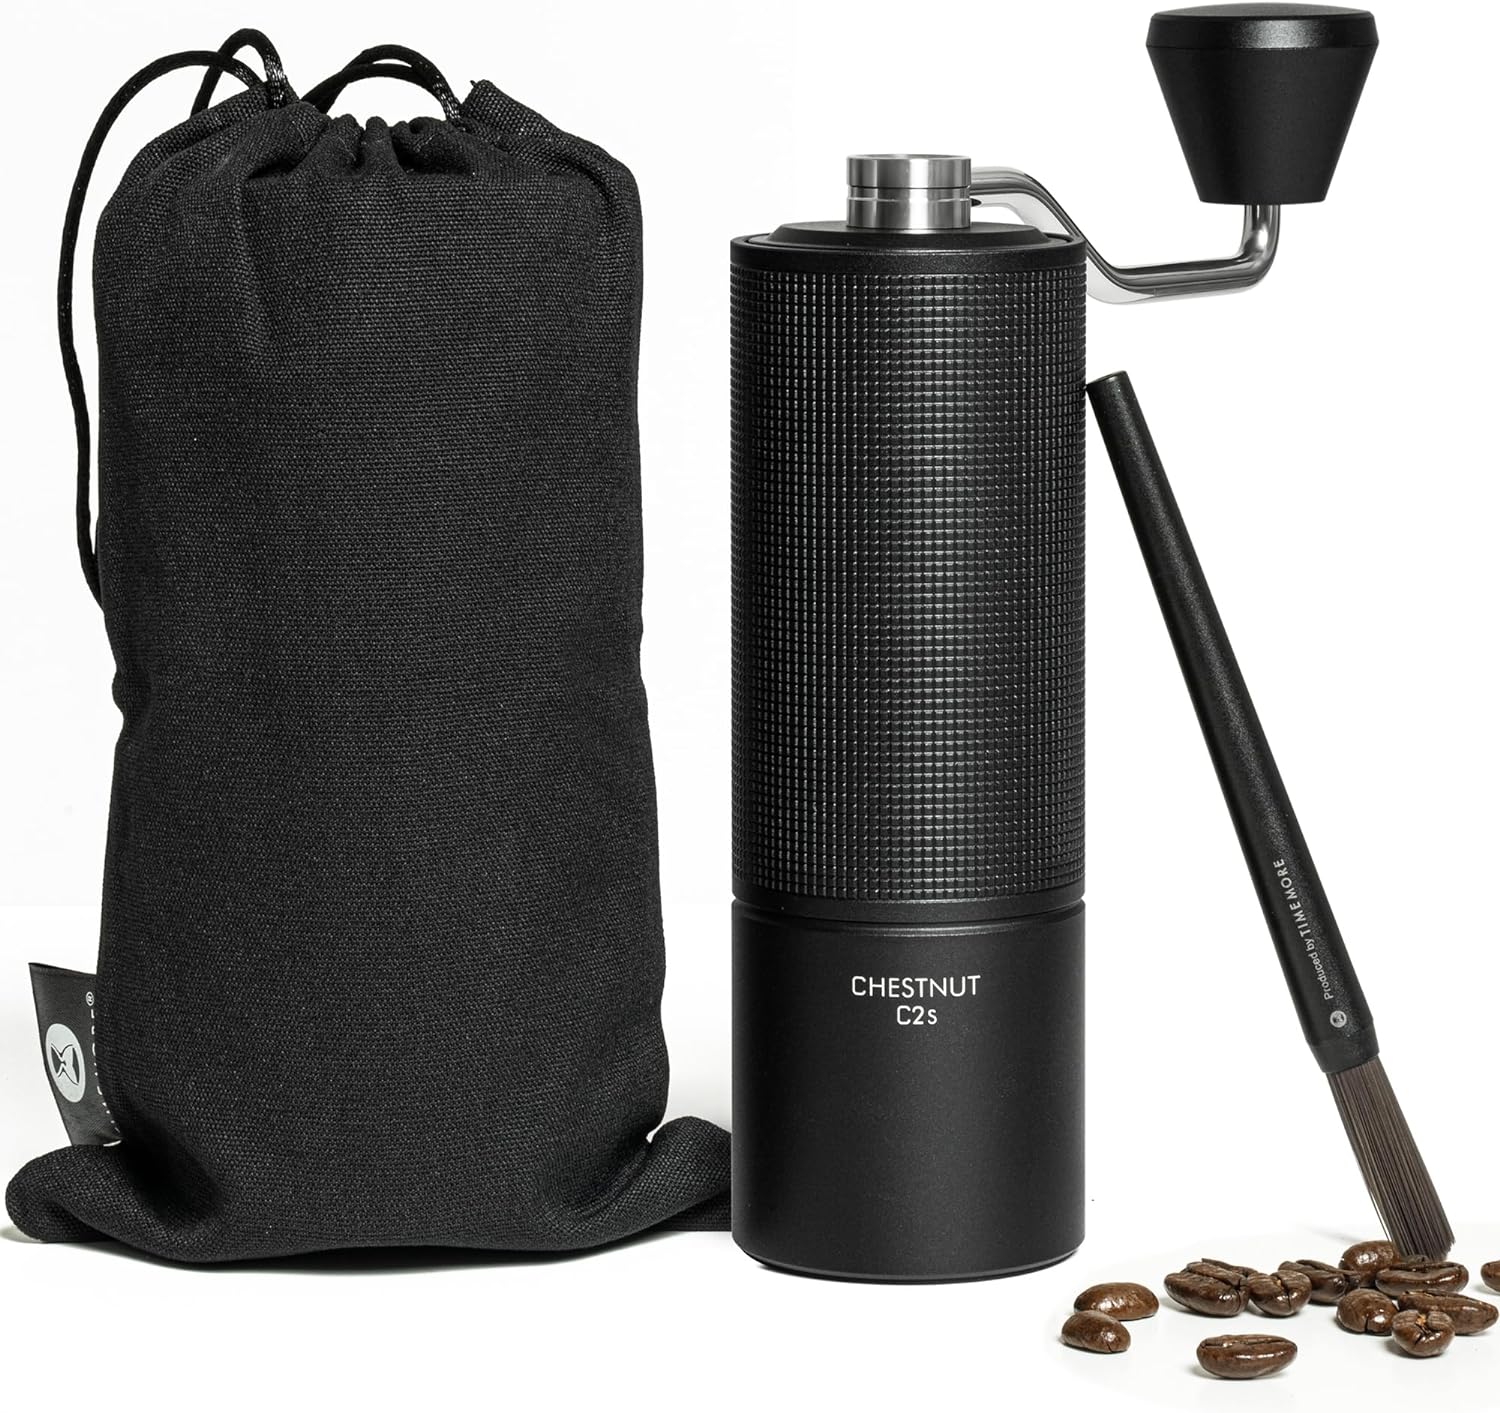 TIMEMORE Chestnut C2S Manual Coffee Grinder: The Perfect Blend of Quality and Convenience